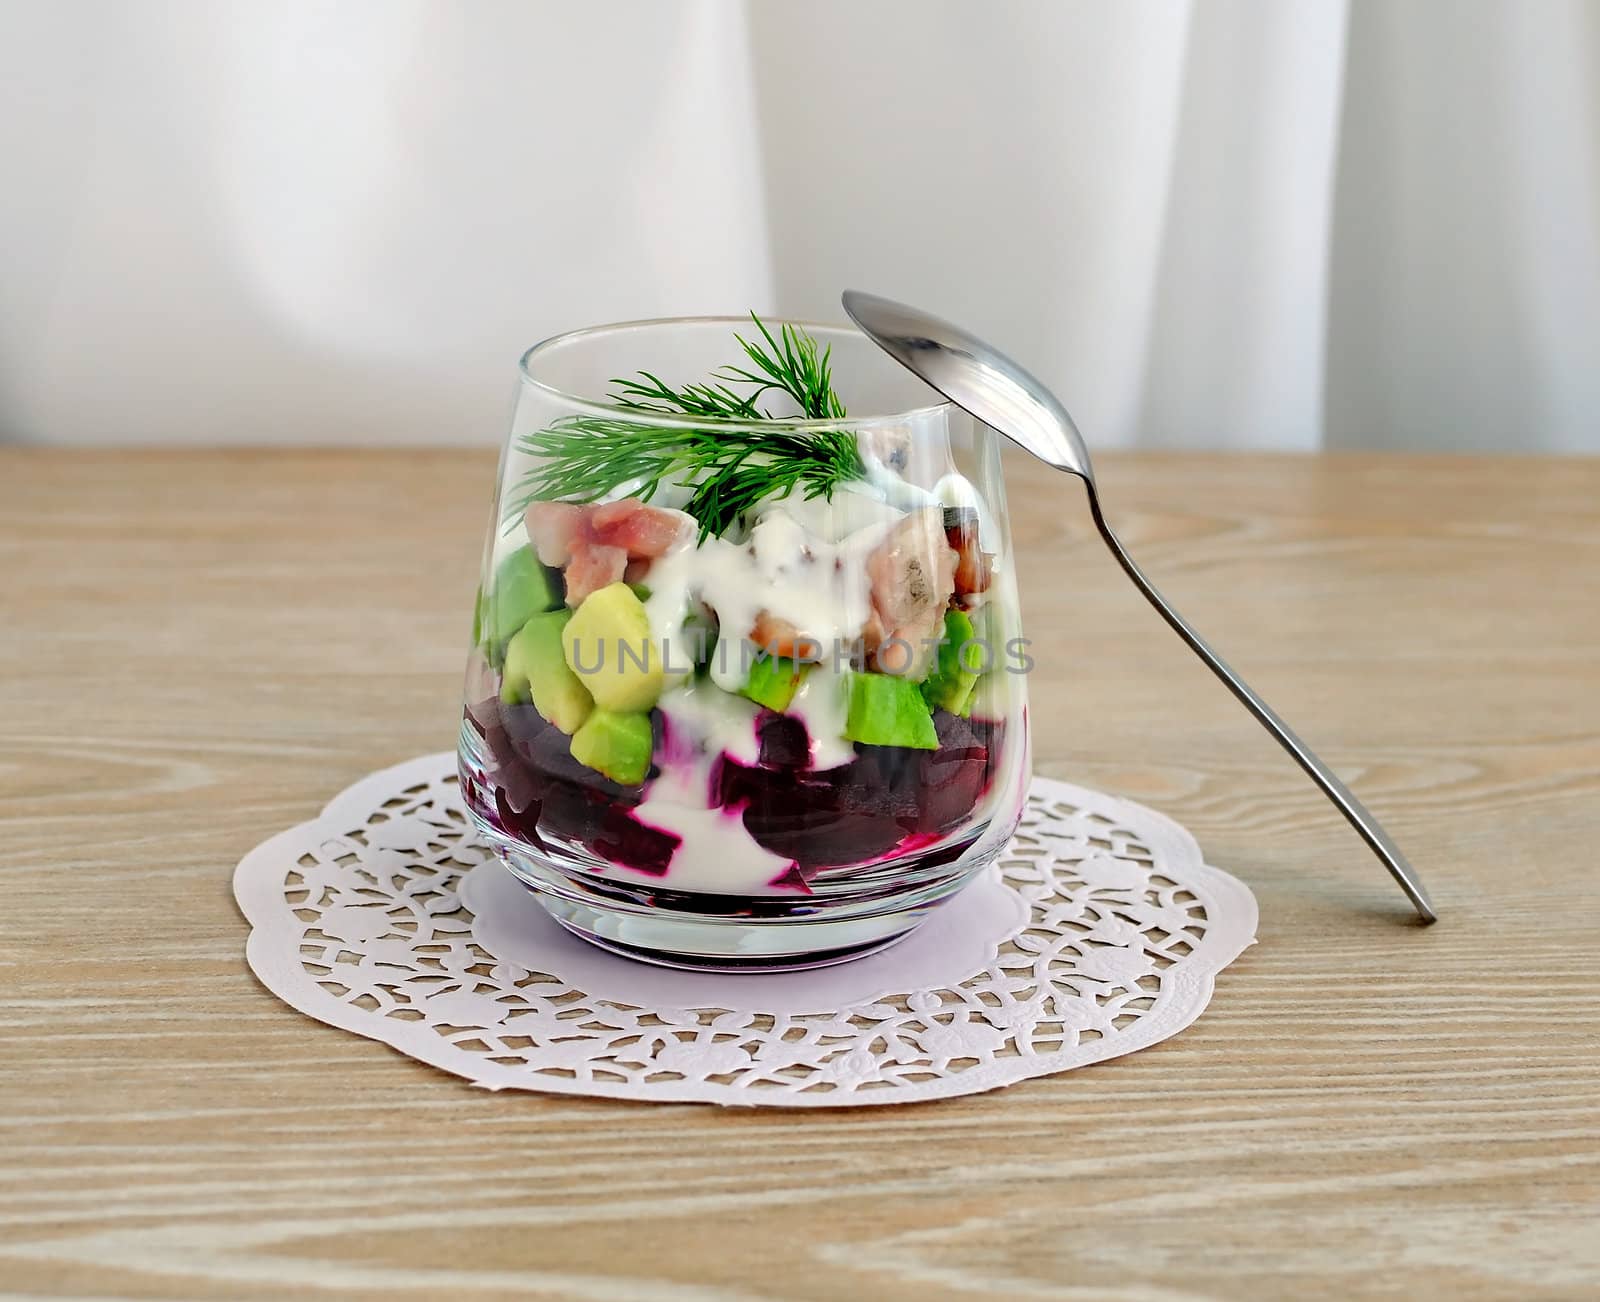 Beetroot salad with avocado and herring in cream sauce in a glass